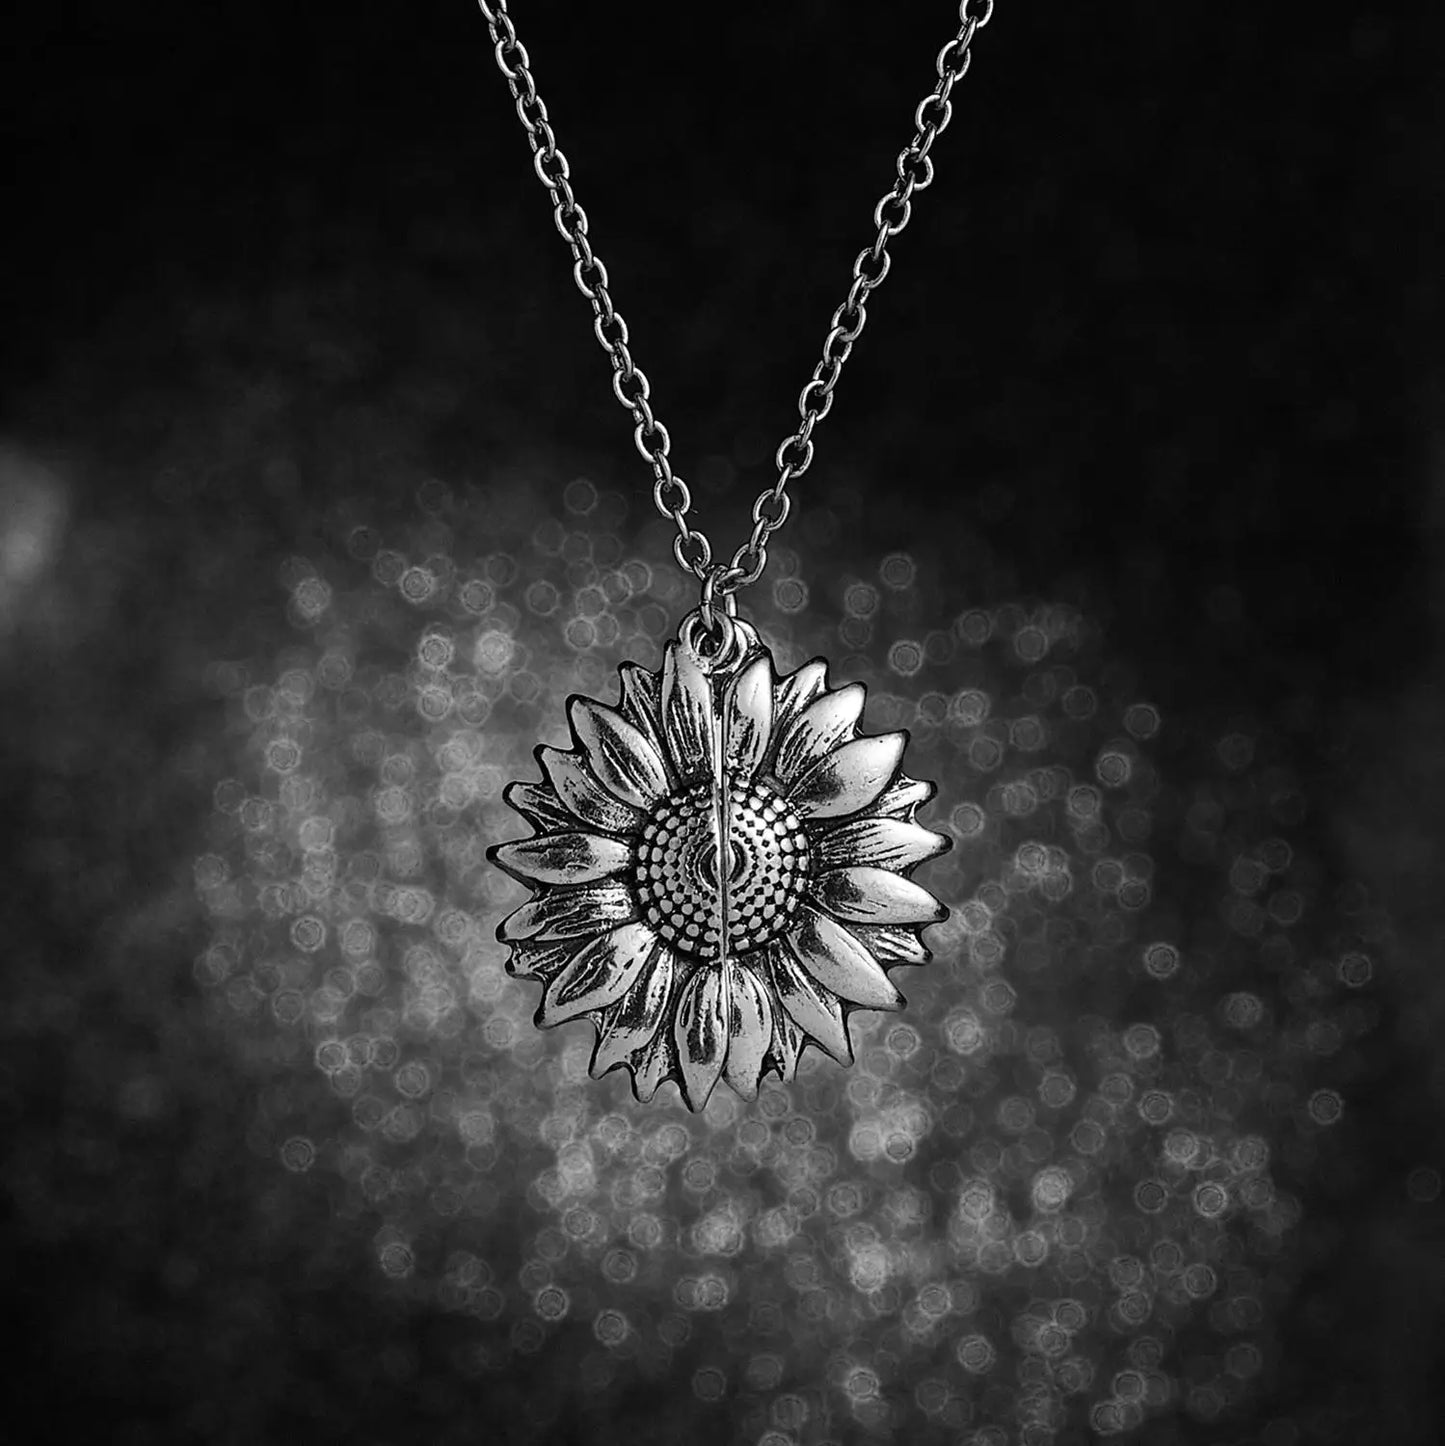 You are my sunshine Vintage Sunflower pendant Double-layer Open Necklace